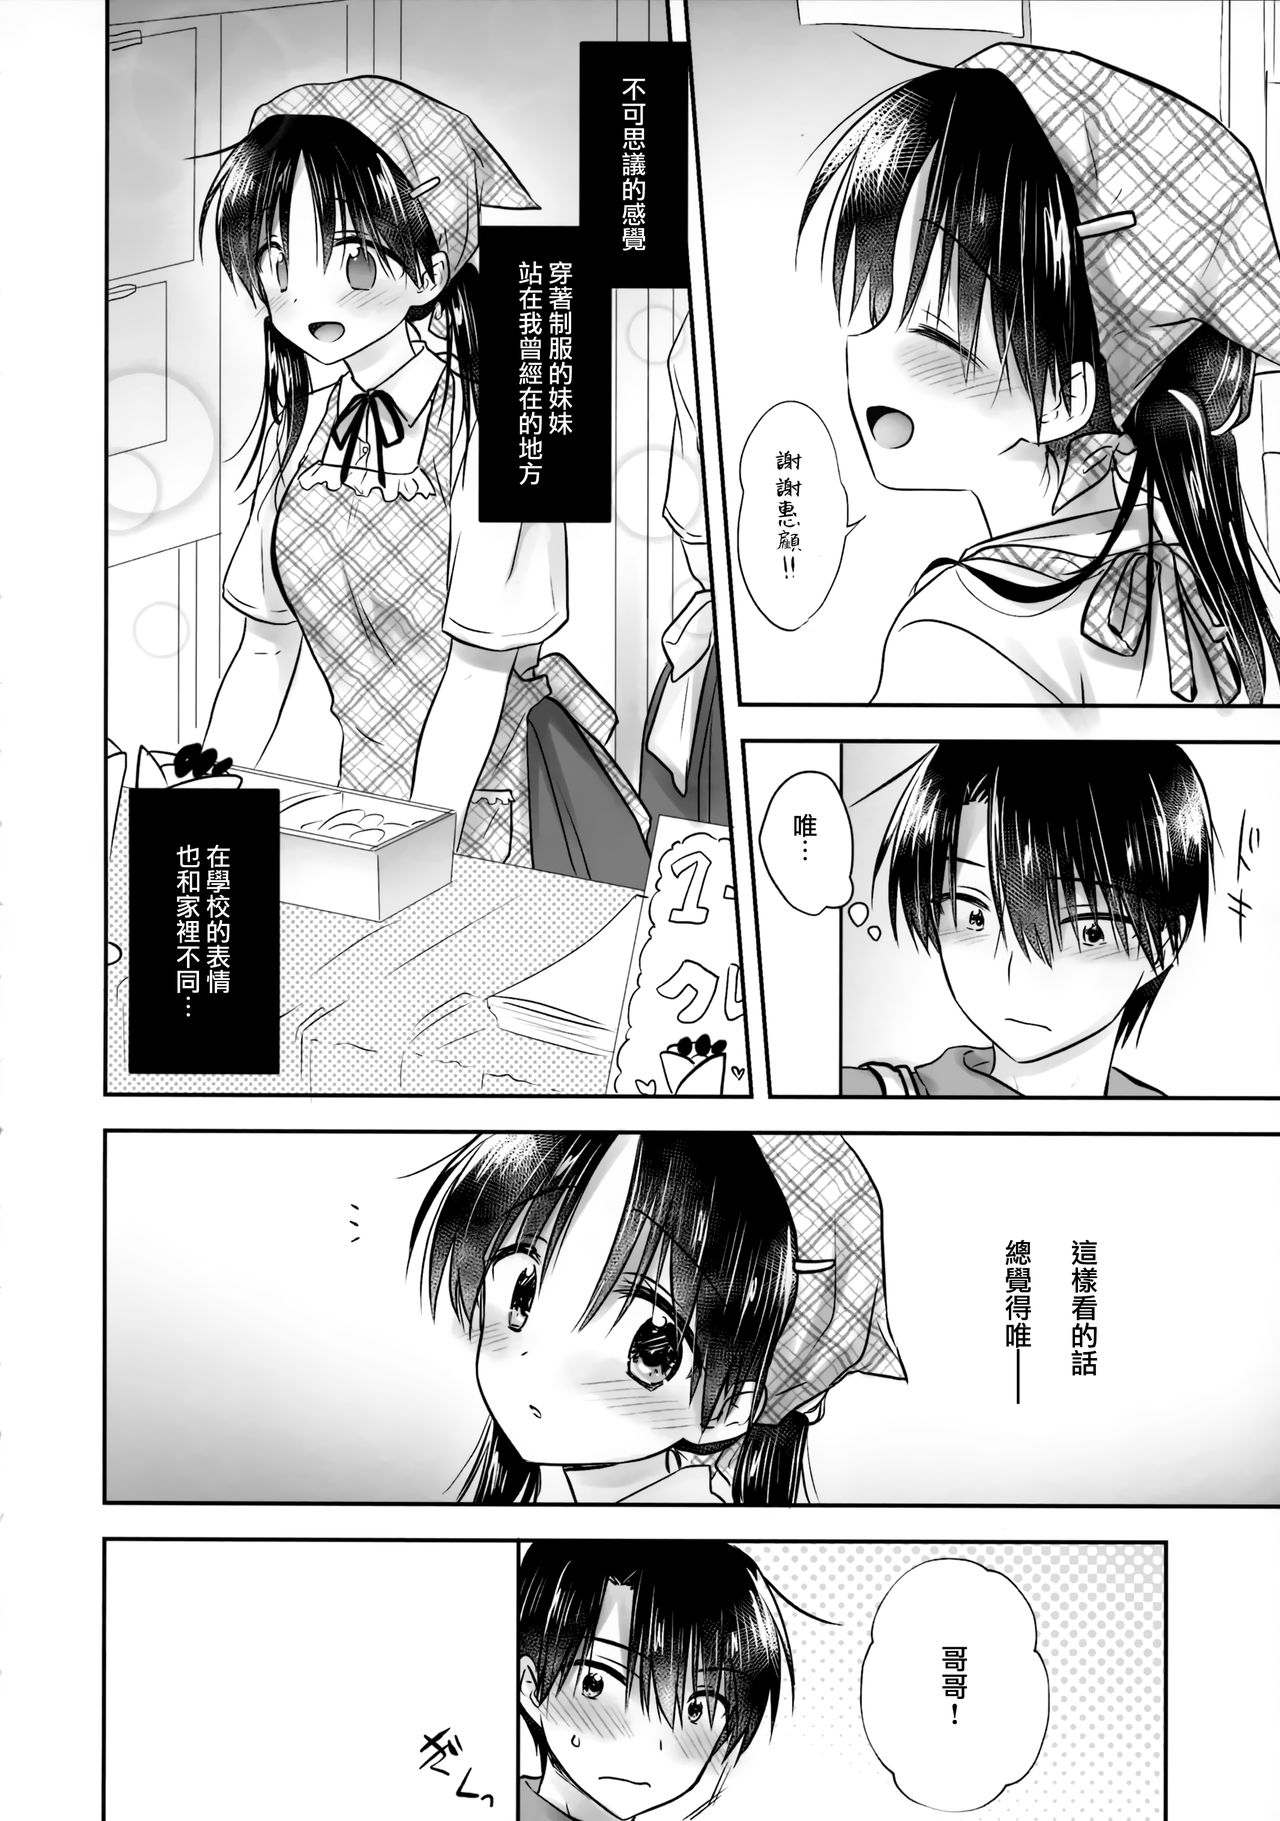 (C96) [Aquadrop (Mikami Mika)] Omoide Sex [Chinese] [山樱汉化] page 11 full